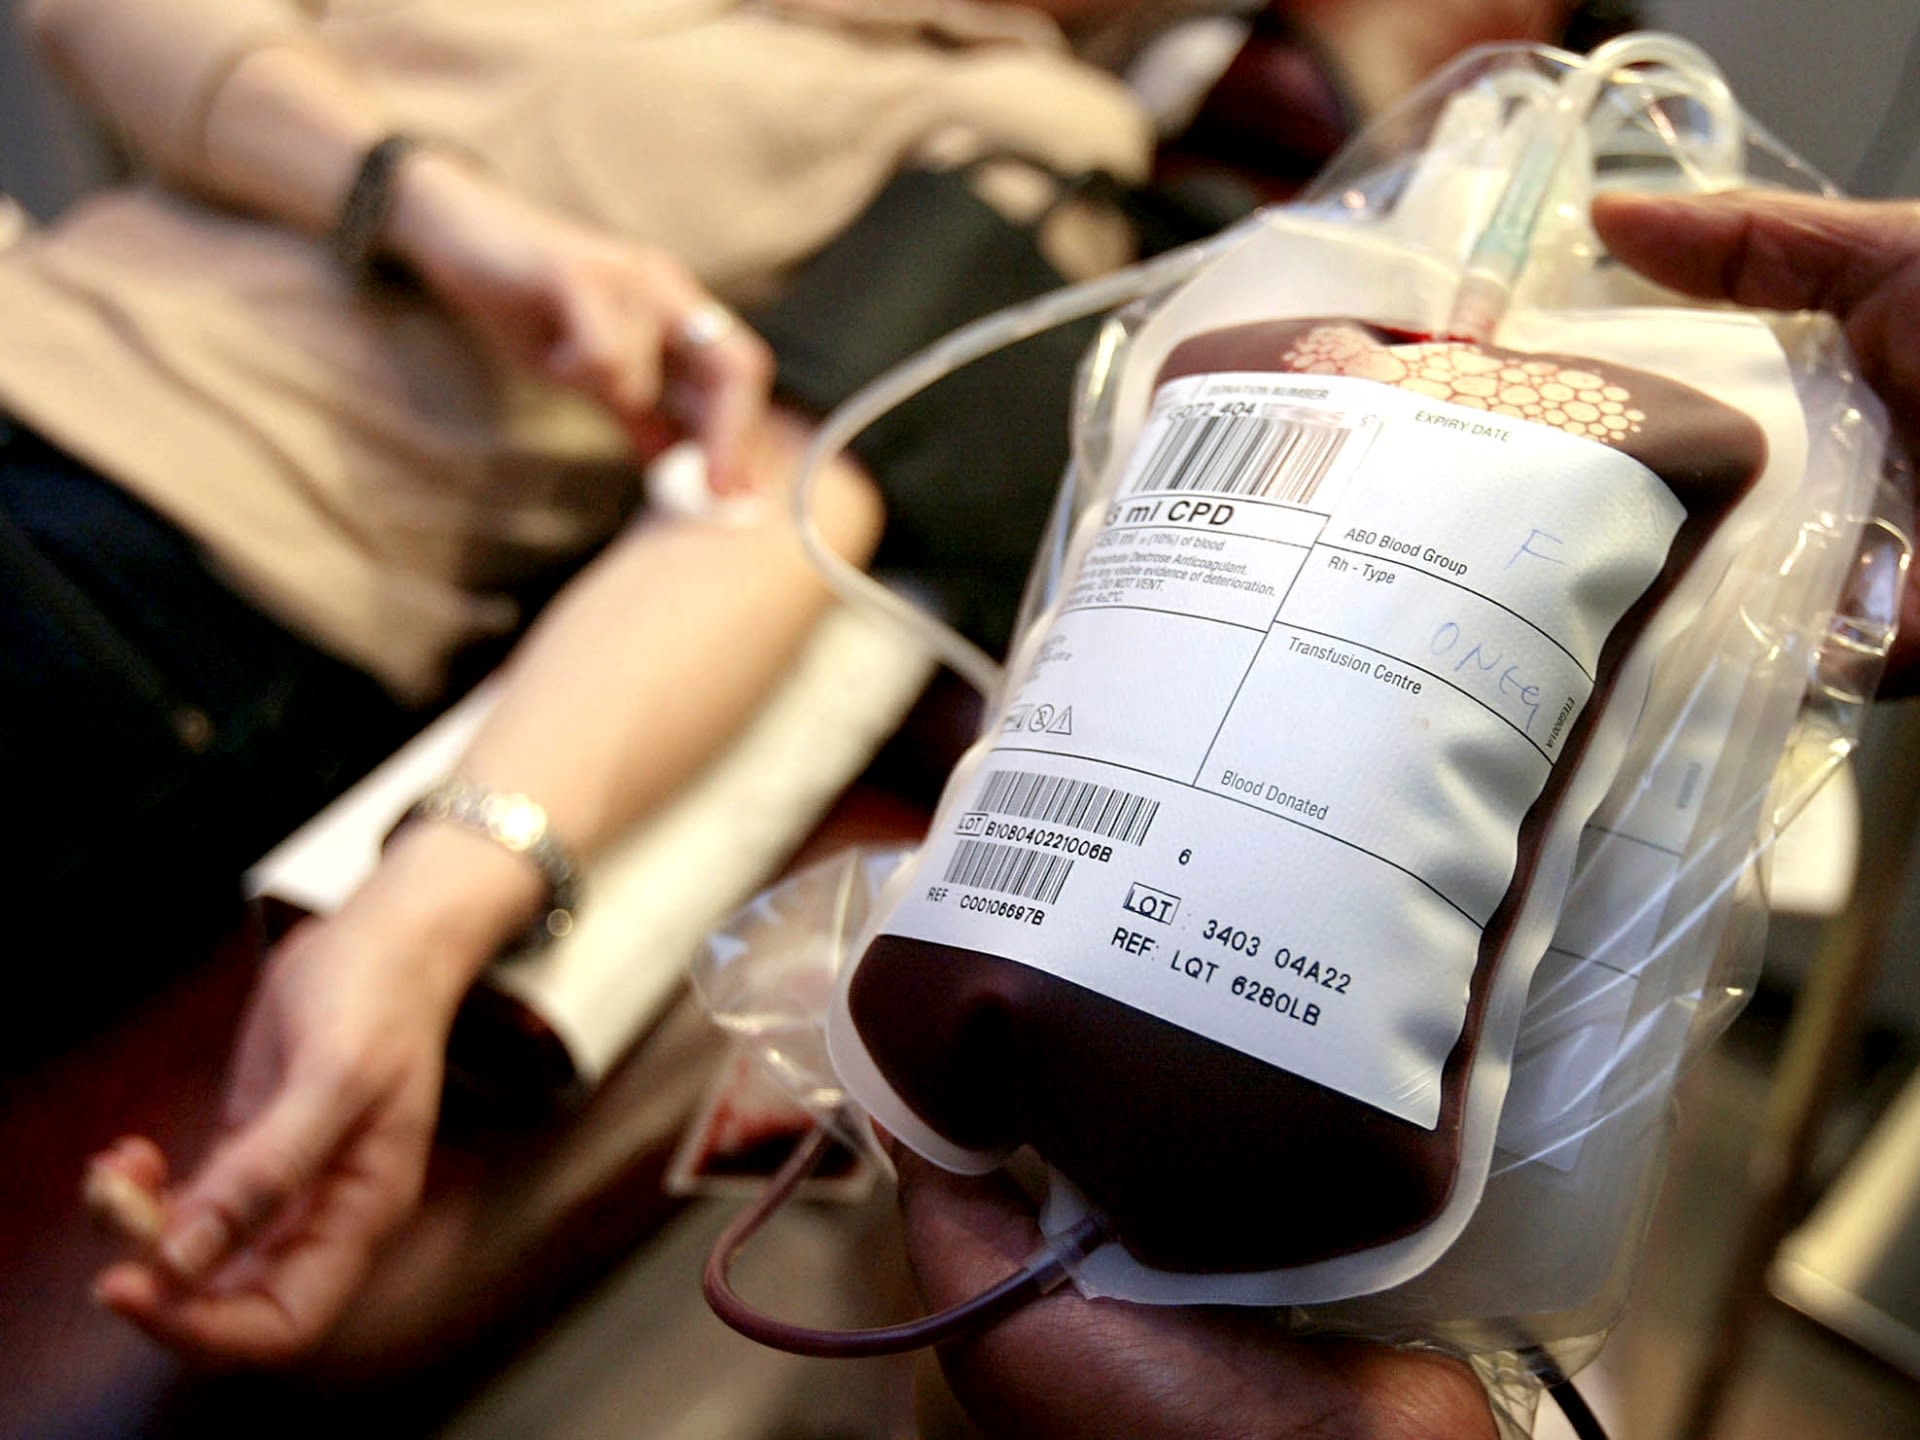 UK infected blood scandal victims to receive final compensation this year